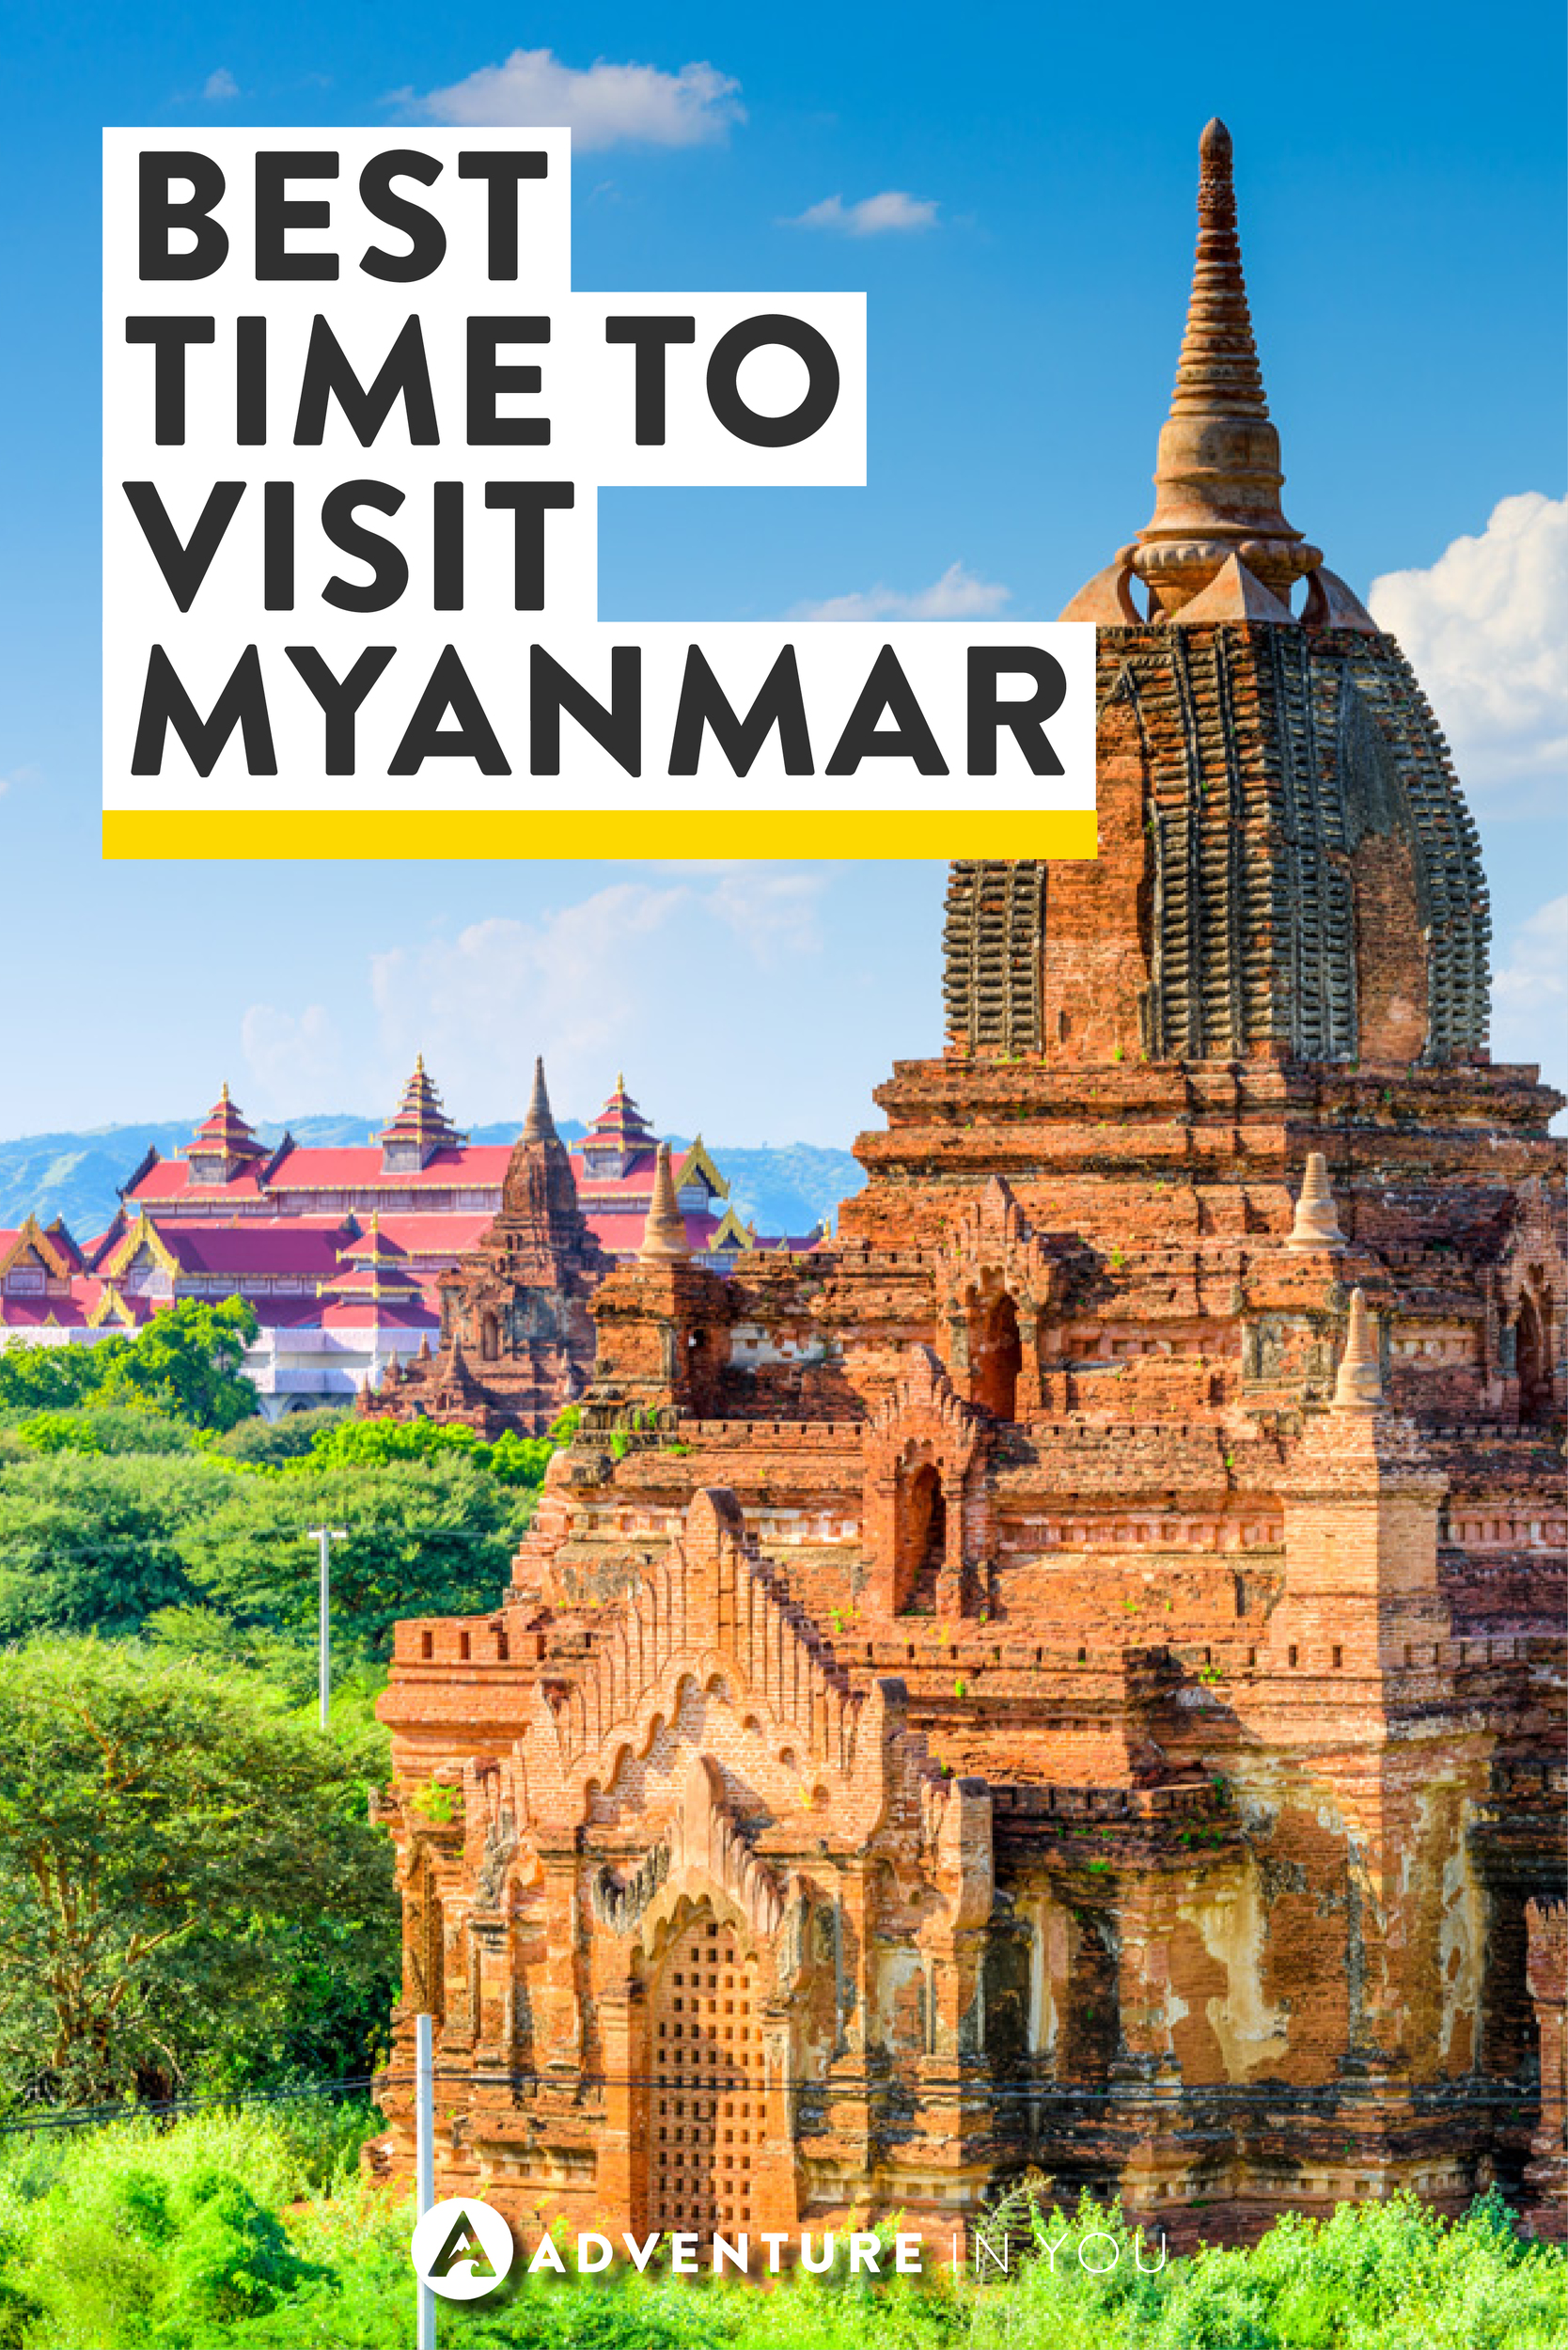 Myanmar Travel | Looking for tips on the best time to visit Myanmar? Take a look at our detailed guide on the best places to visit, when to go, and the weather in those regions